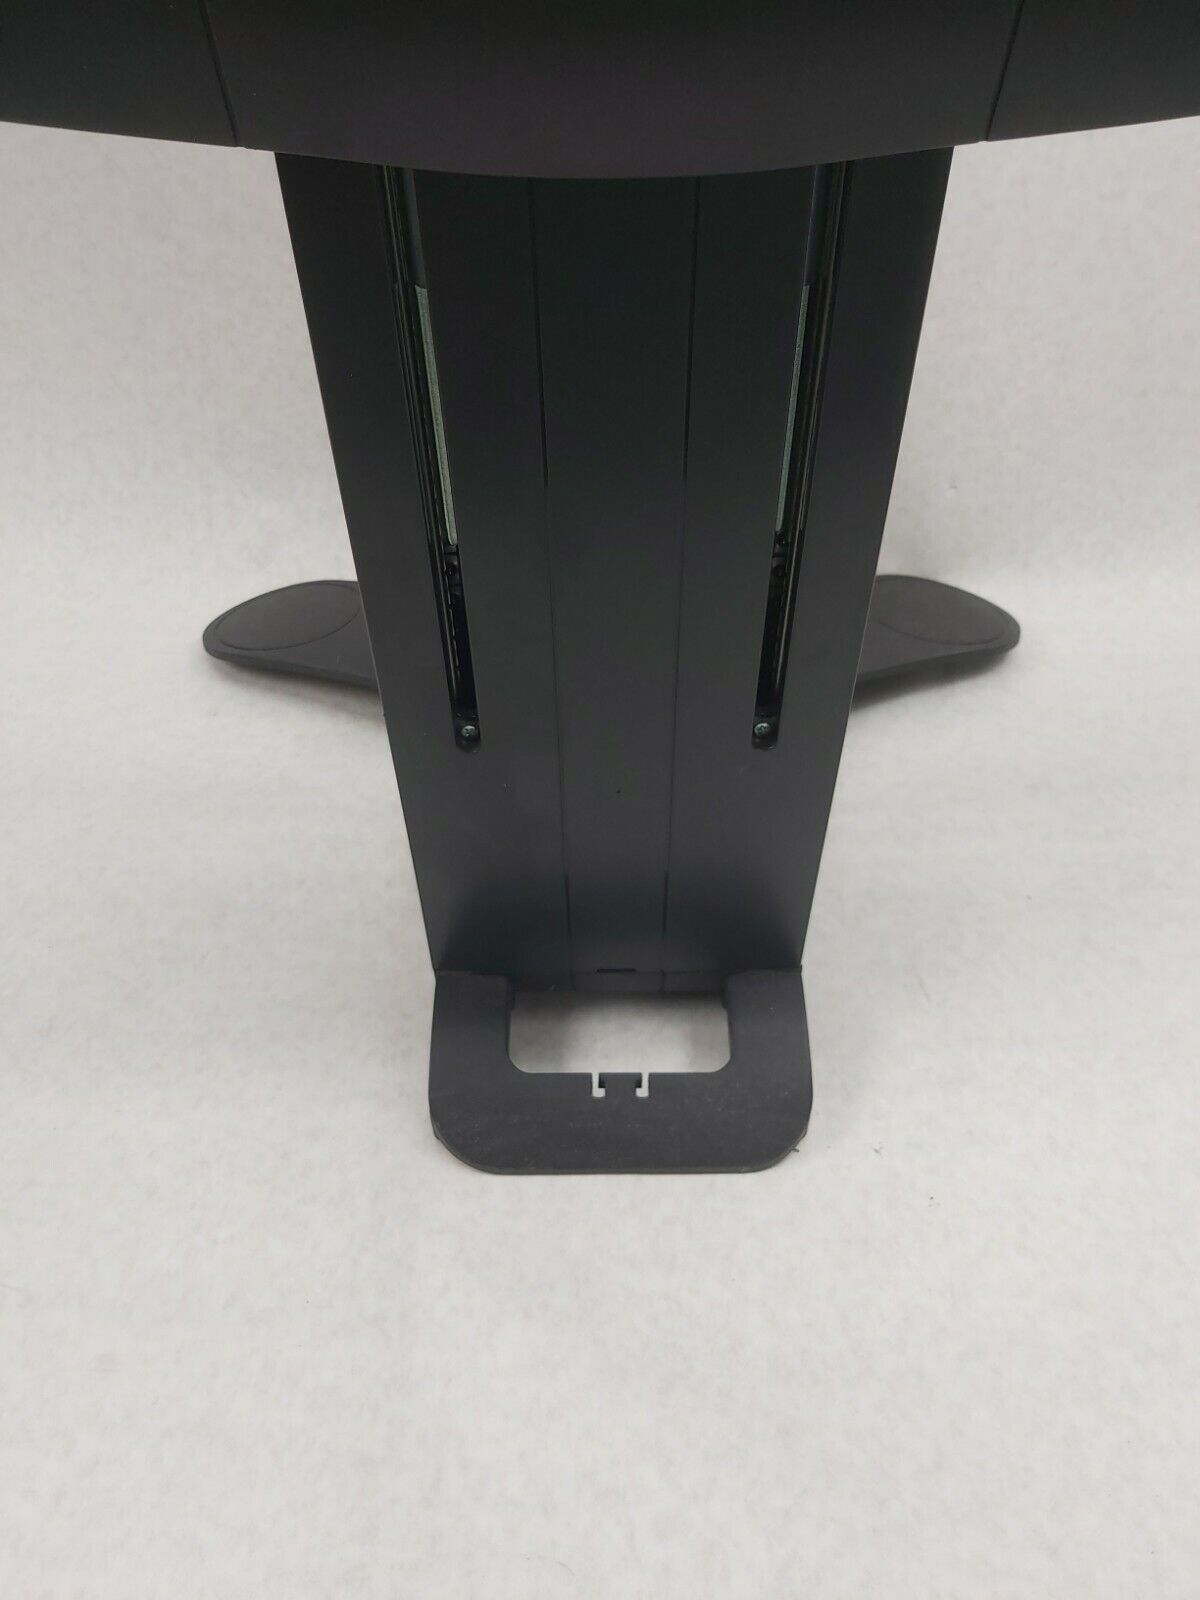 Ergotron 33-296-195 Display Stand for Monitors